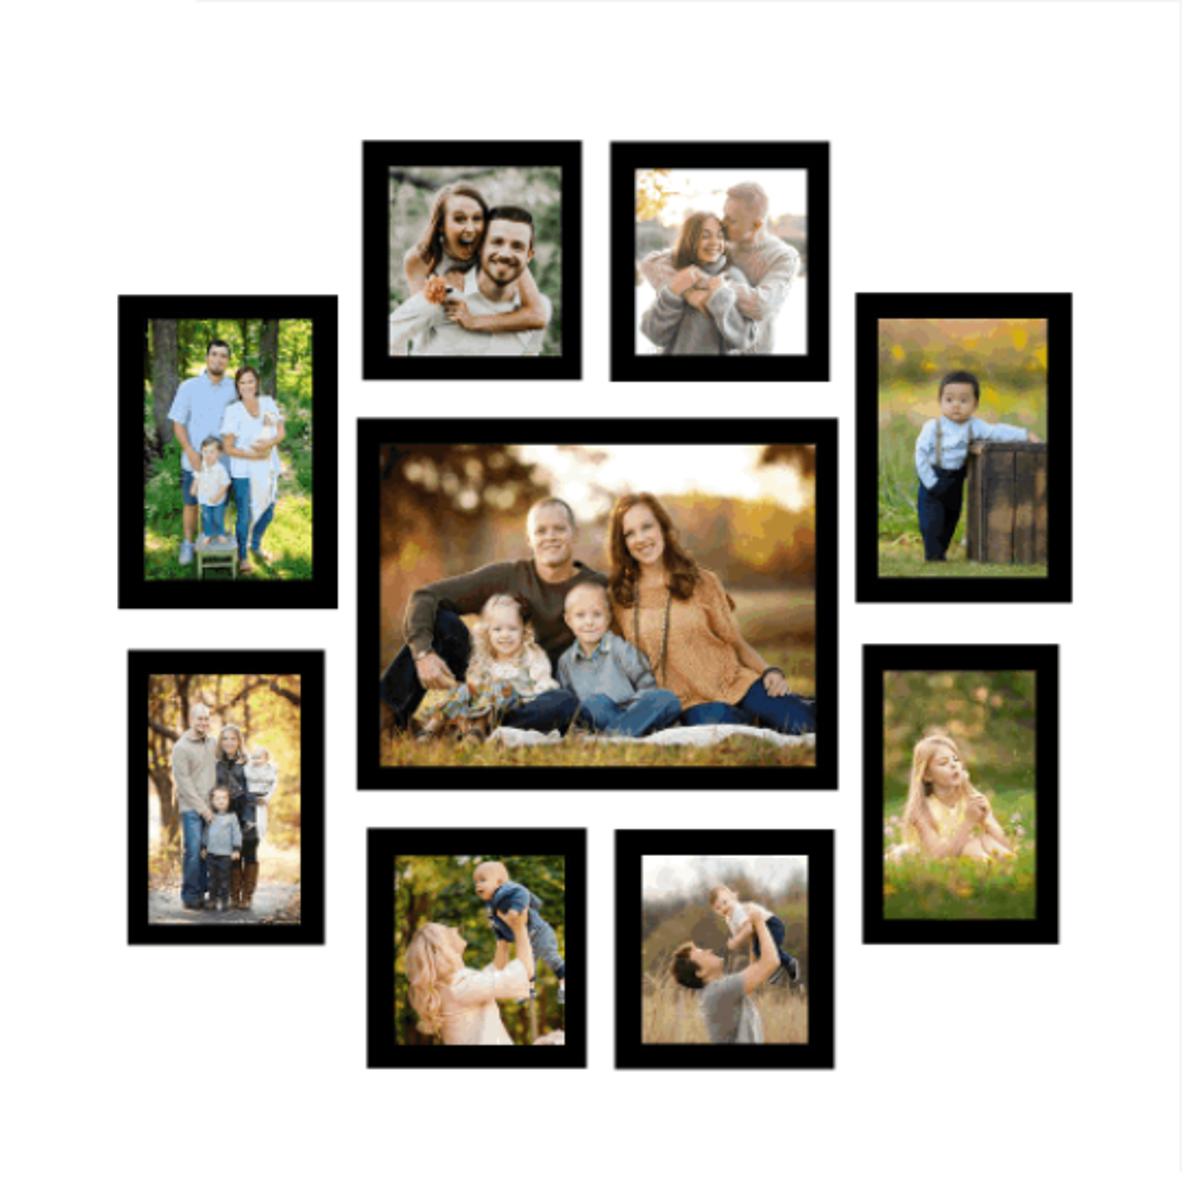 Set of 9 Collage Photo Frames for Living Room Study Room 1 Units of 8 X 10, 4 Units of 5 X 5,2 Unit of 5 X 7, 2 Units of 4 X 6) Inches